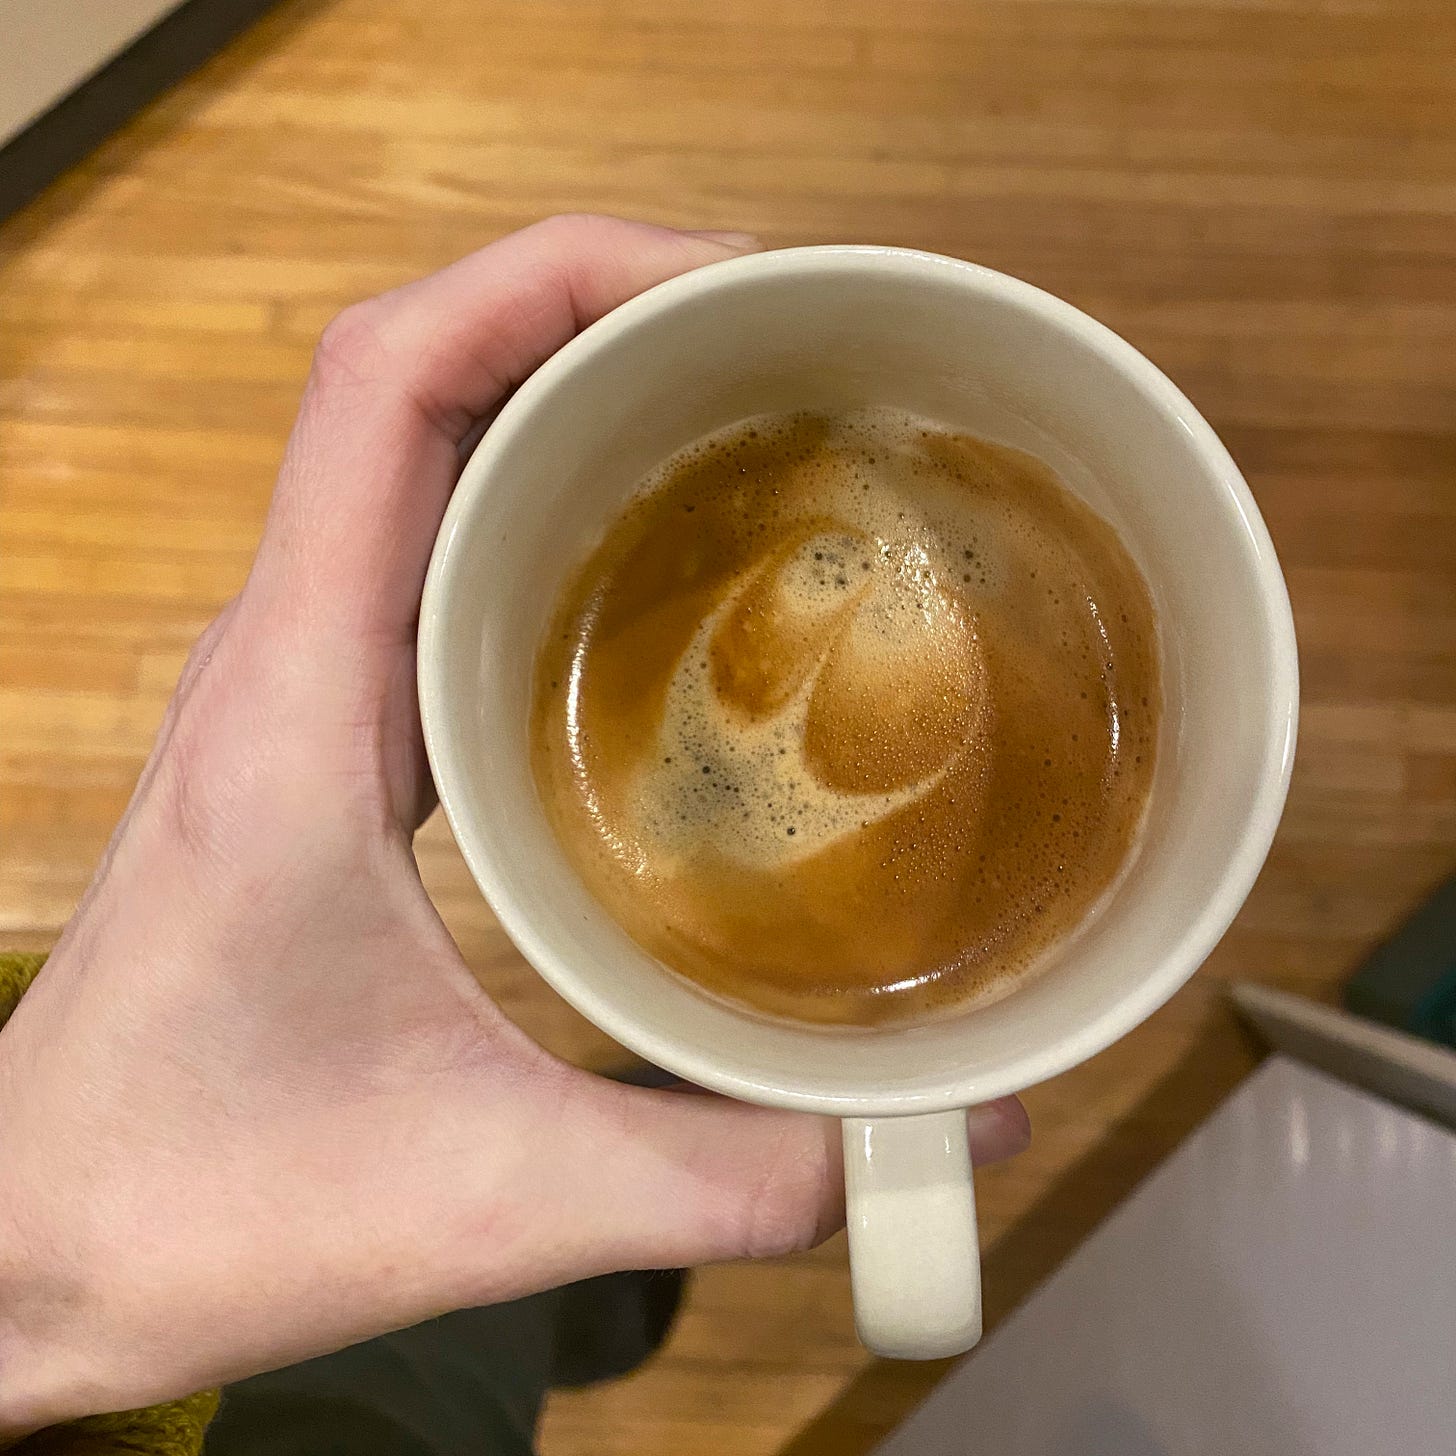 From above, my hand holding a mug of espresso. In the crema is an attempt at a design as described above.